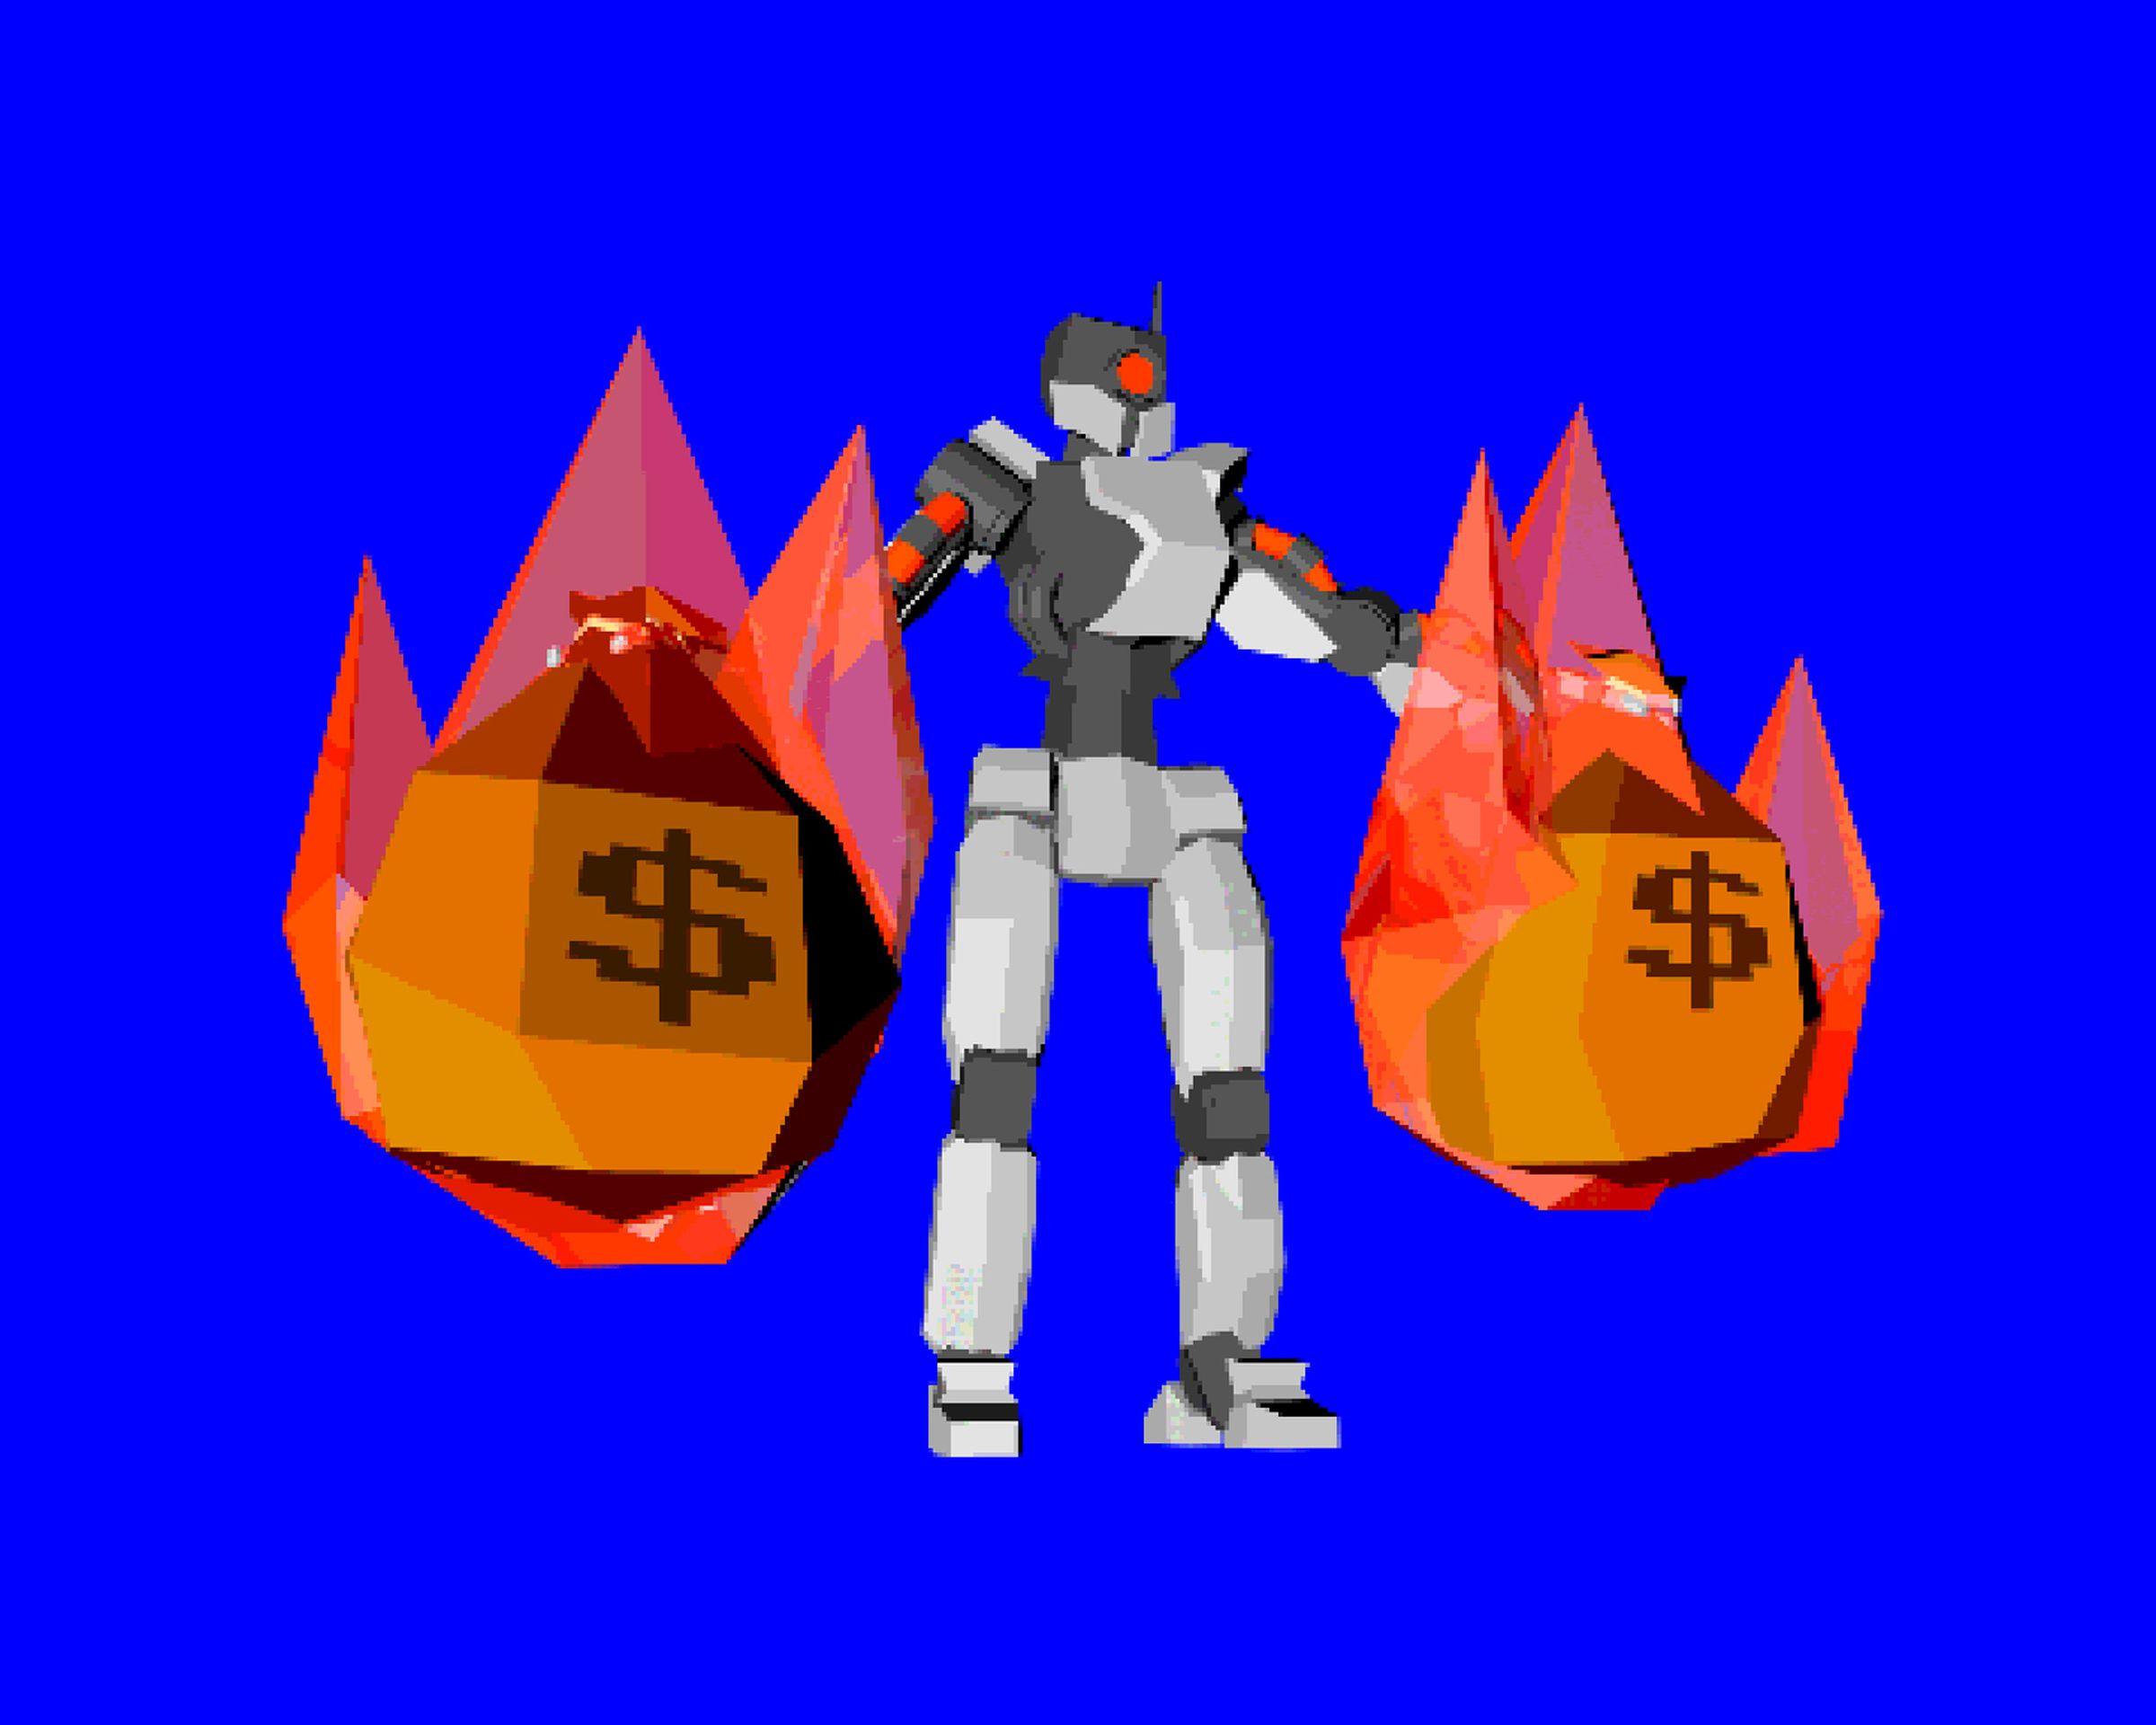 3D illustration of a robot holding two bags of money on fire.